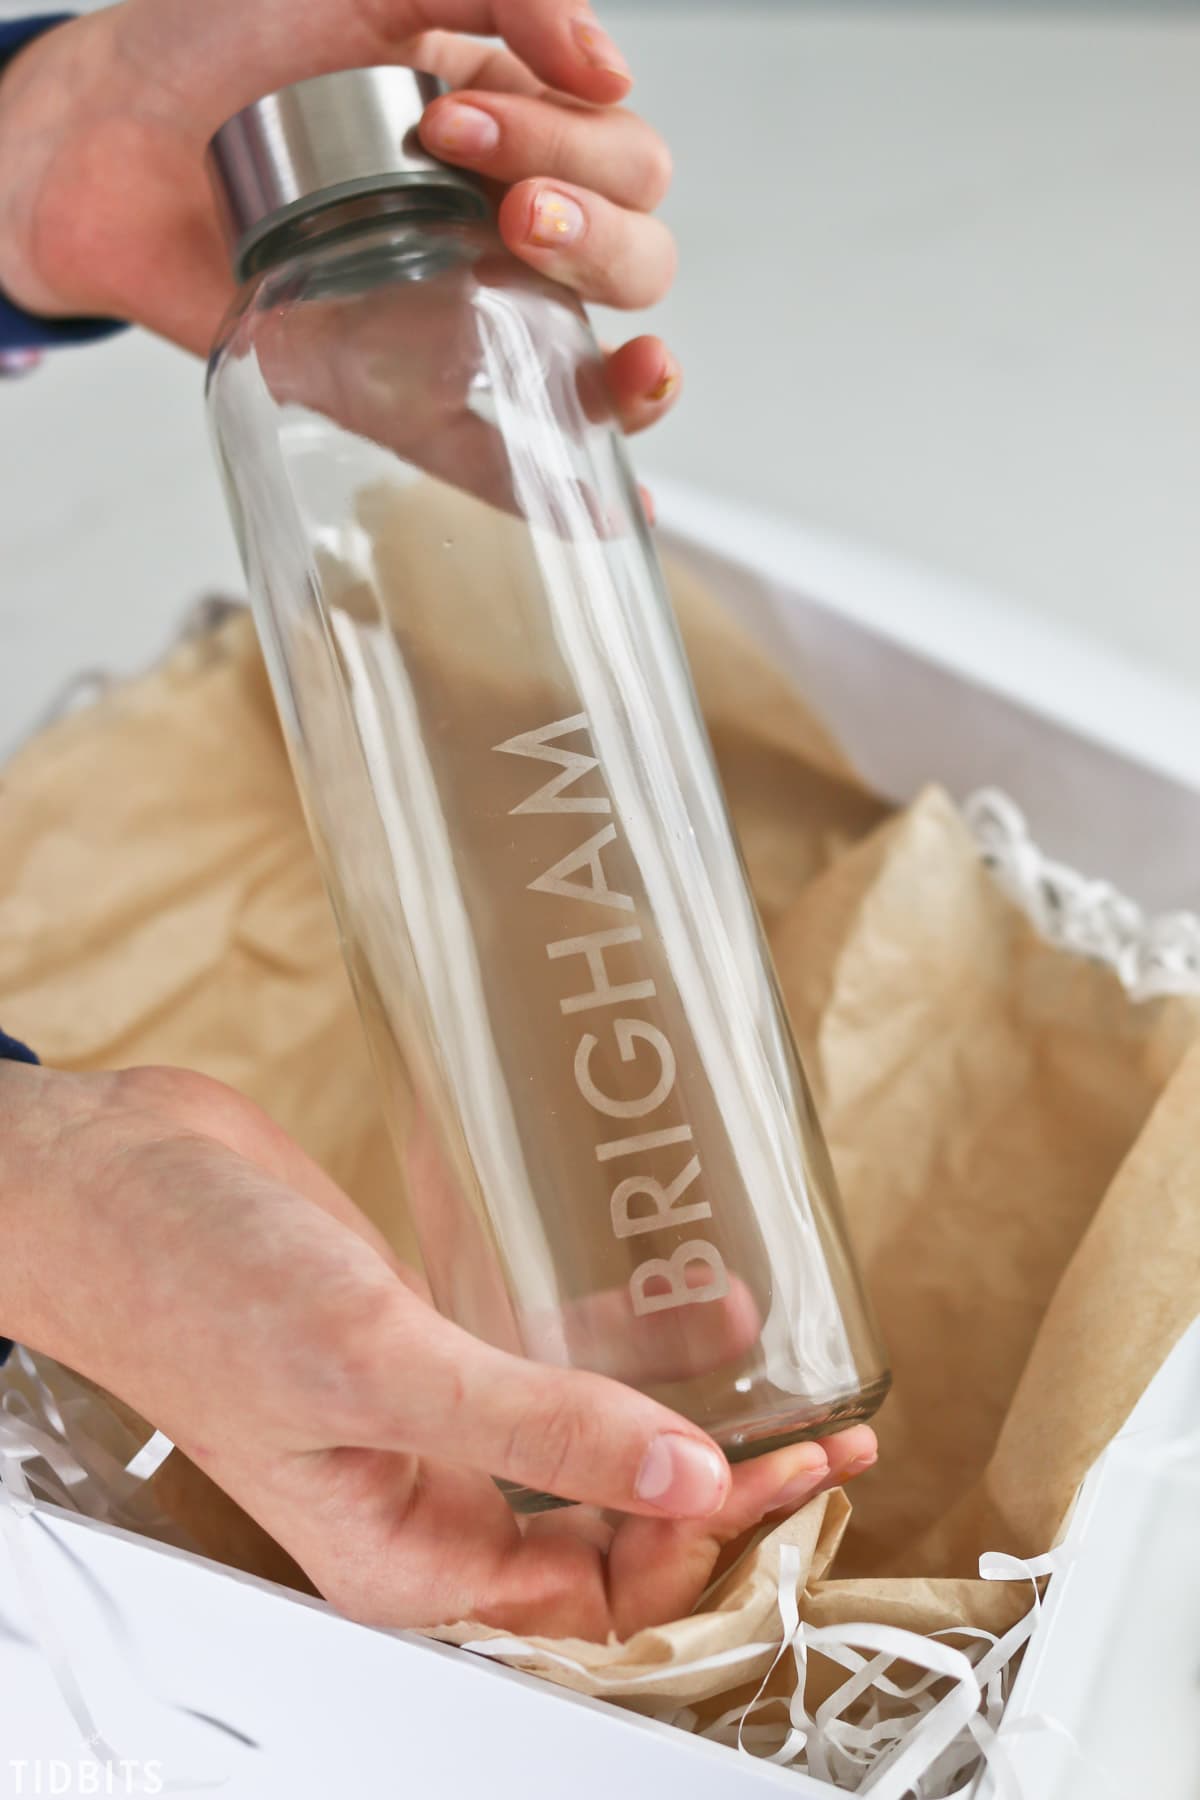 Personalized name etched on glass water bottles, gift idea.